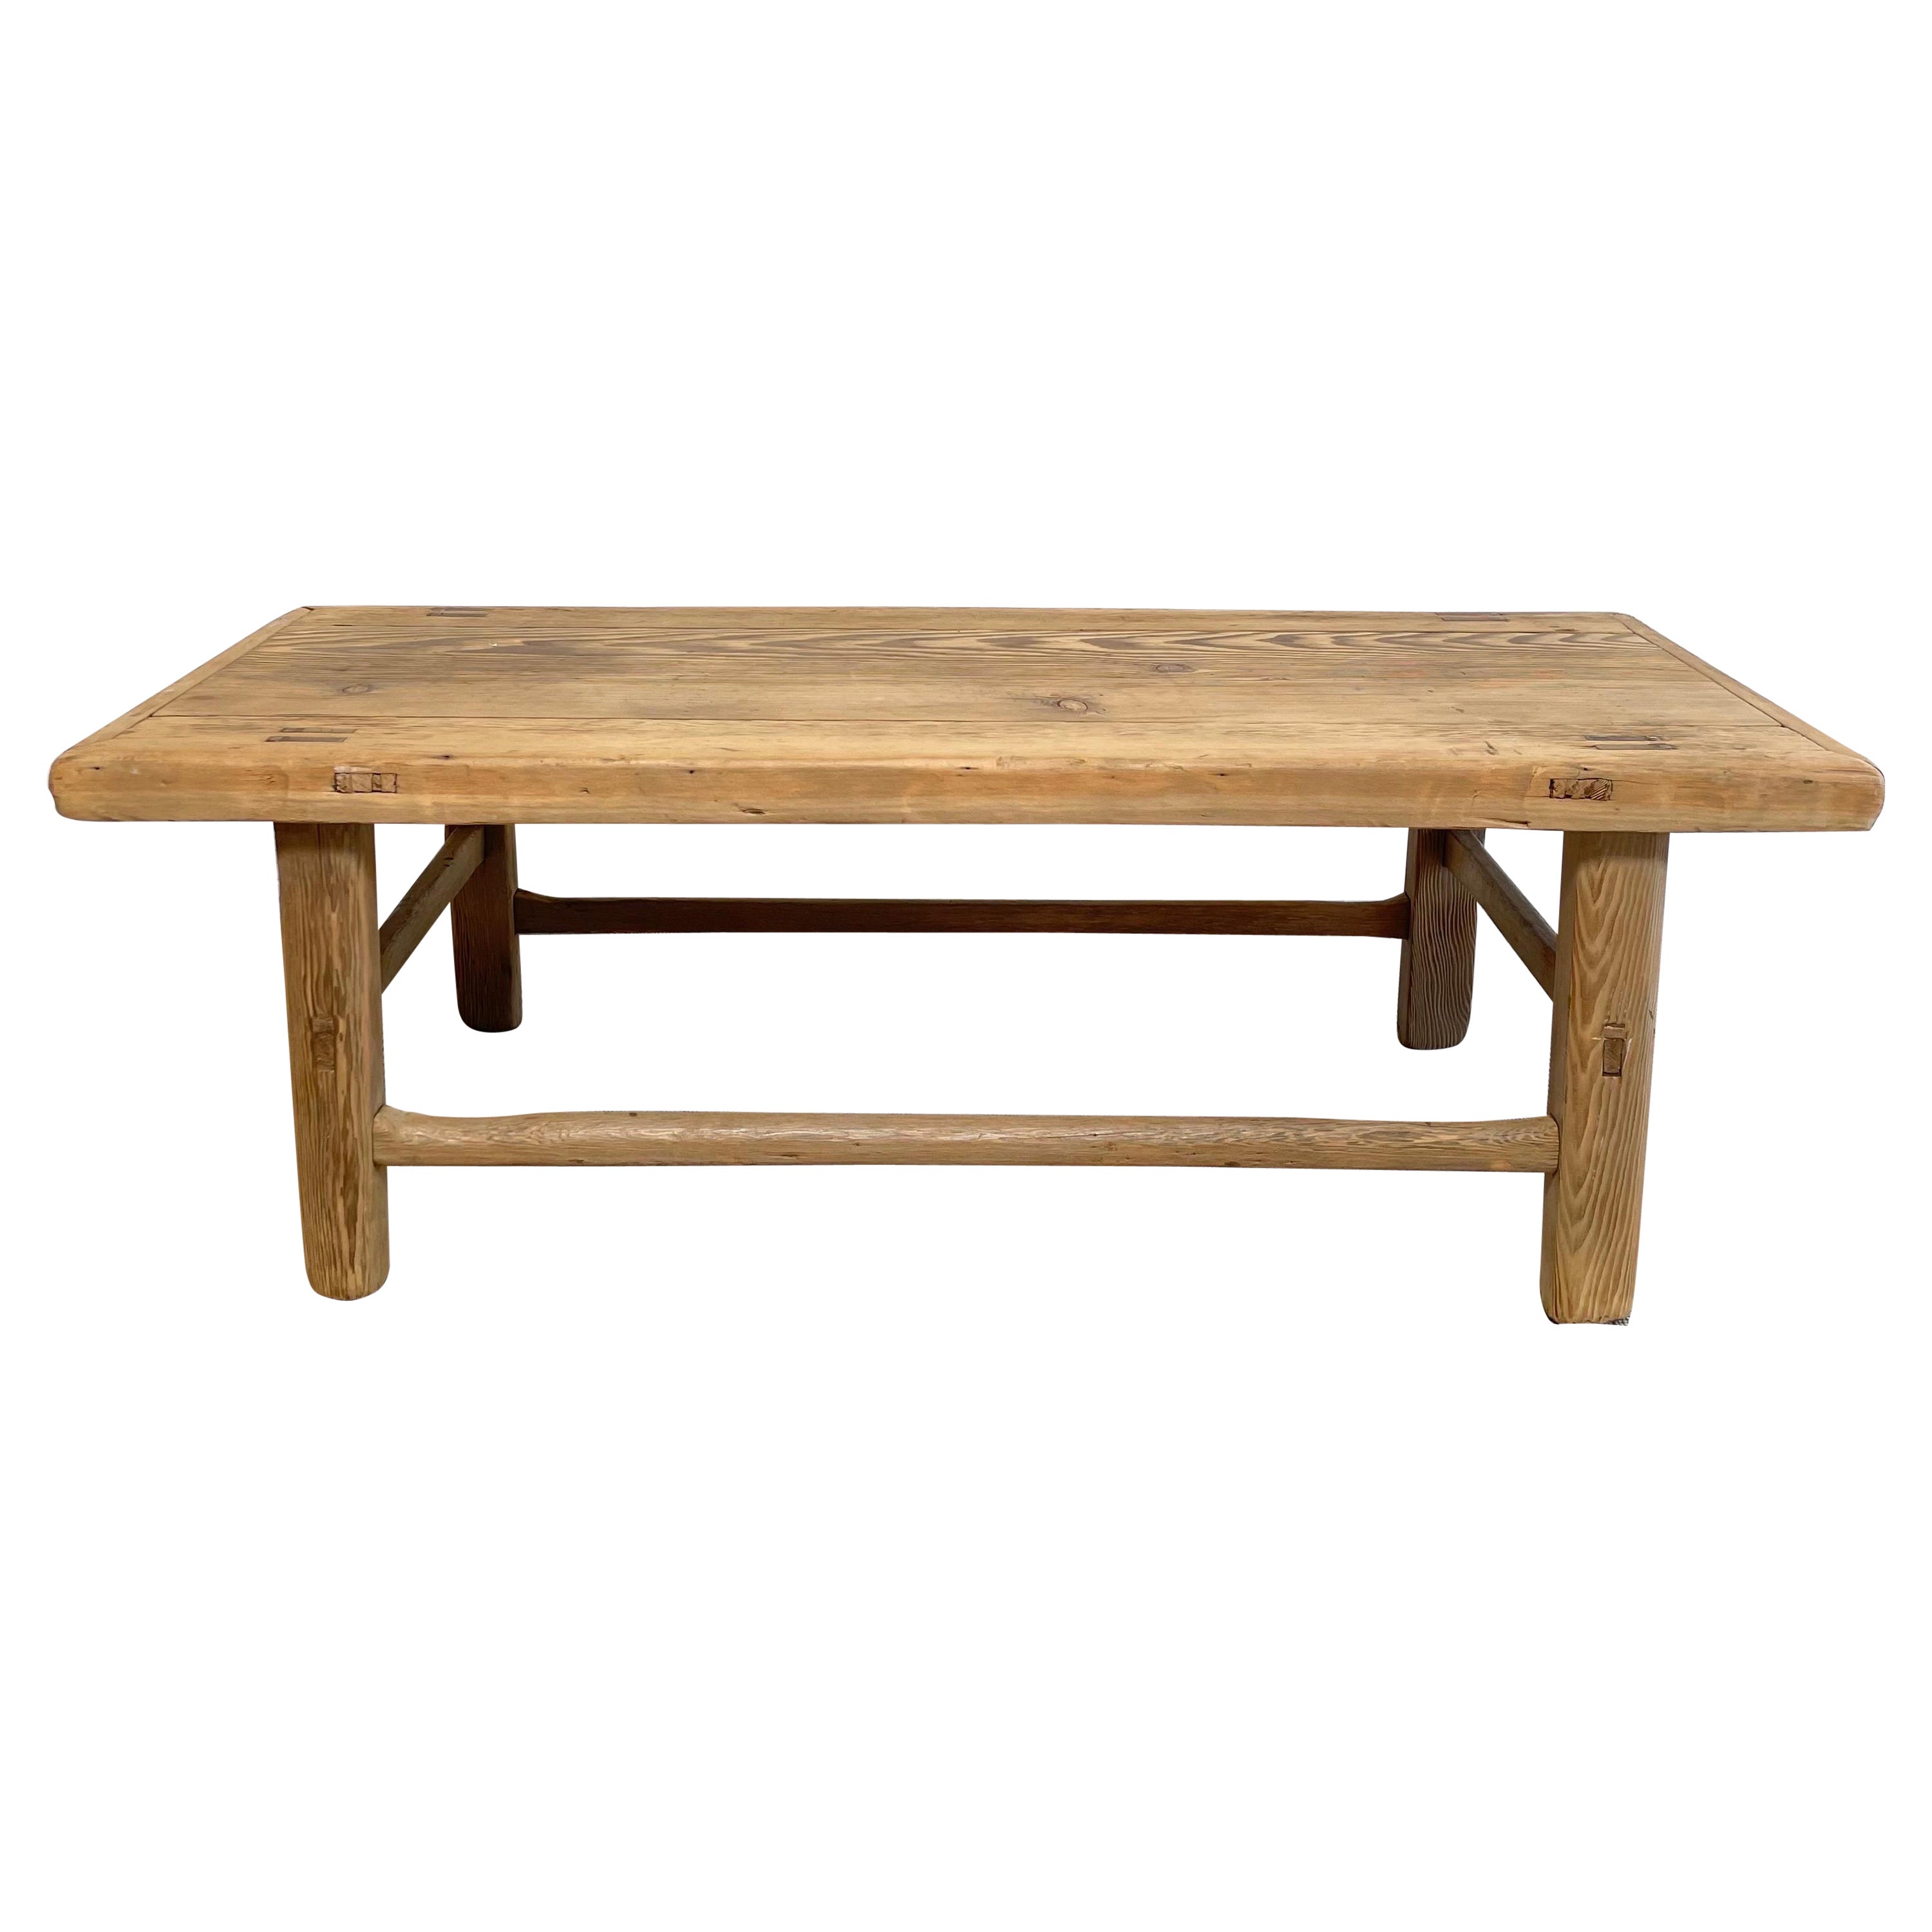 Vintage Elm Wood Coffee Table with Natural Patina